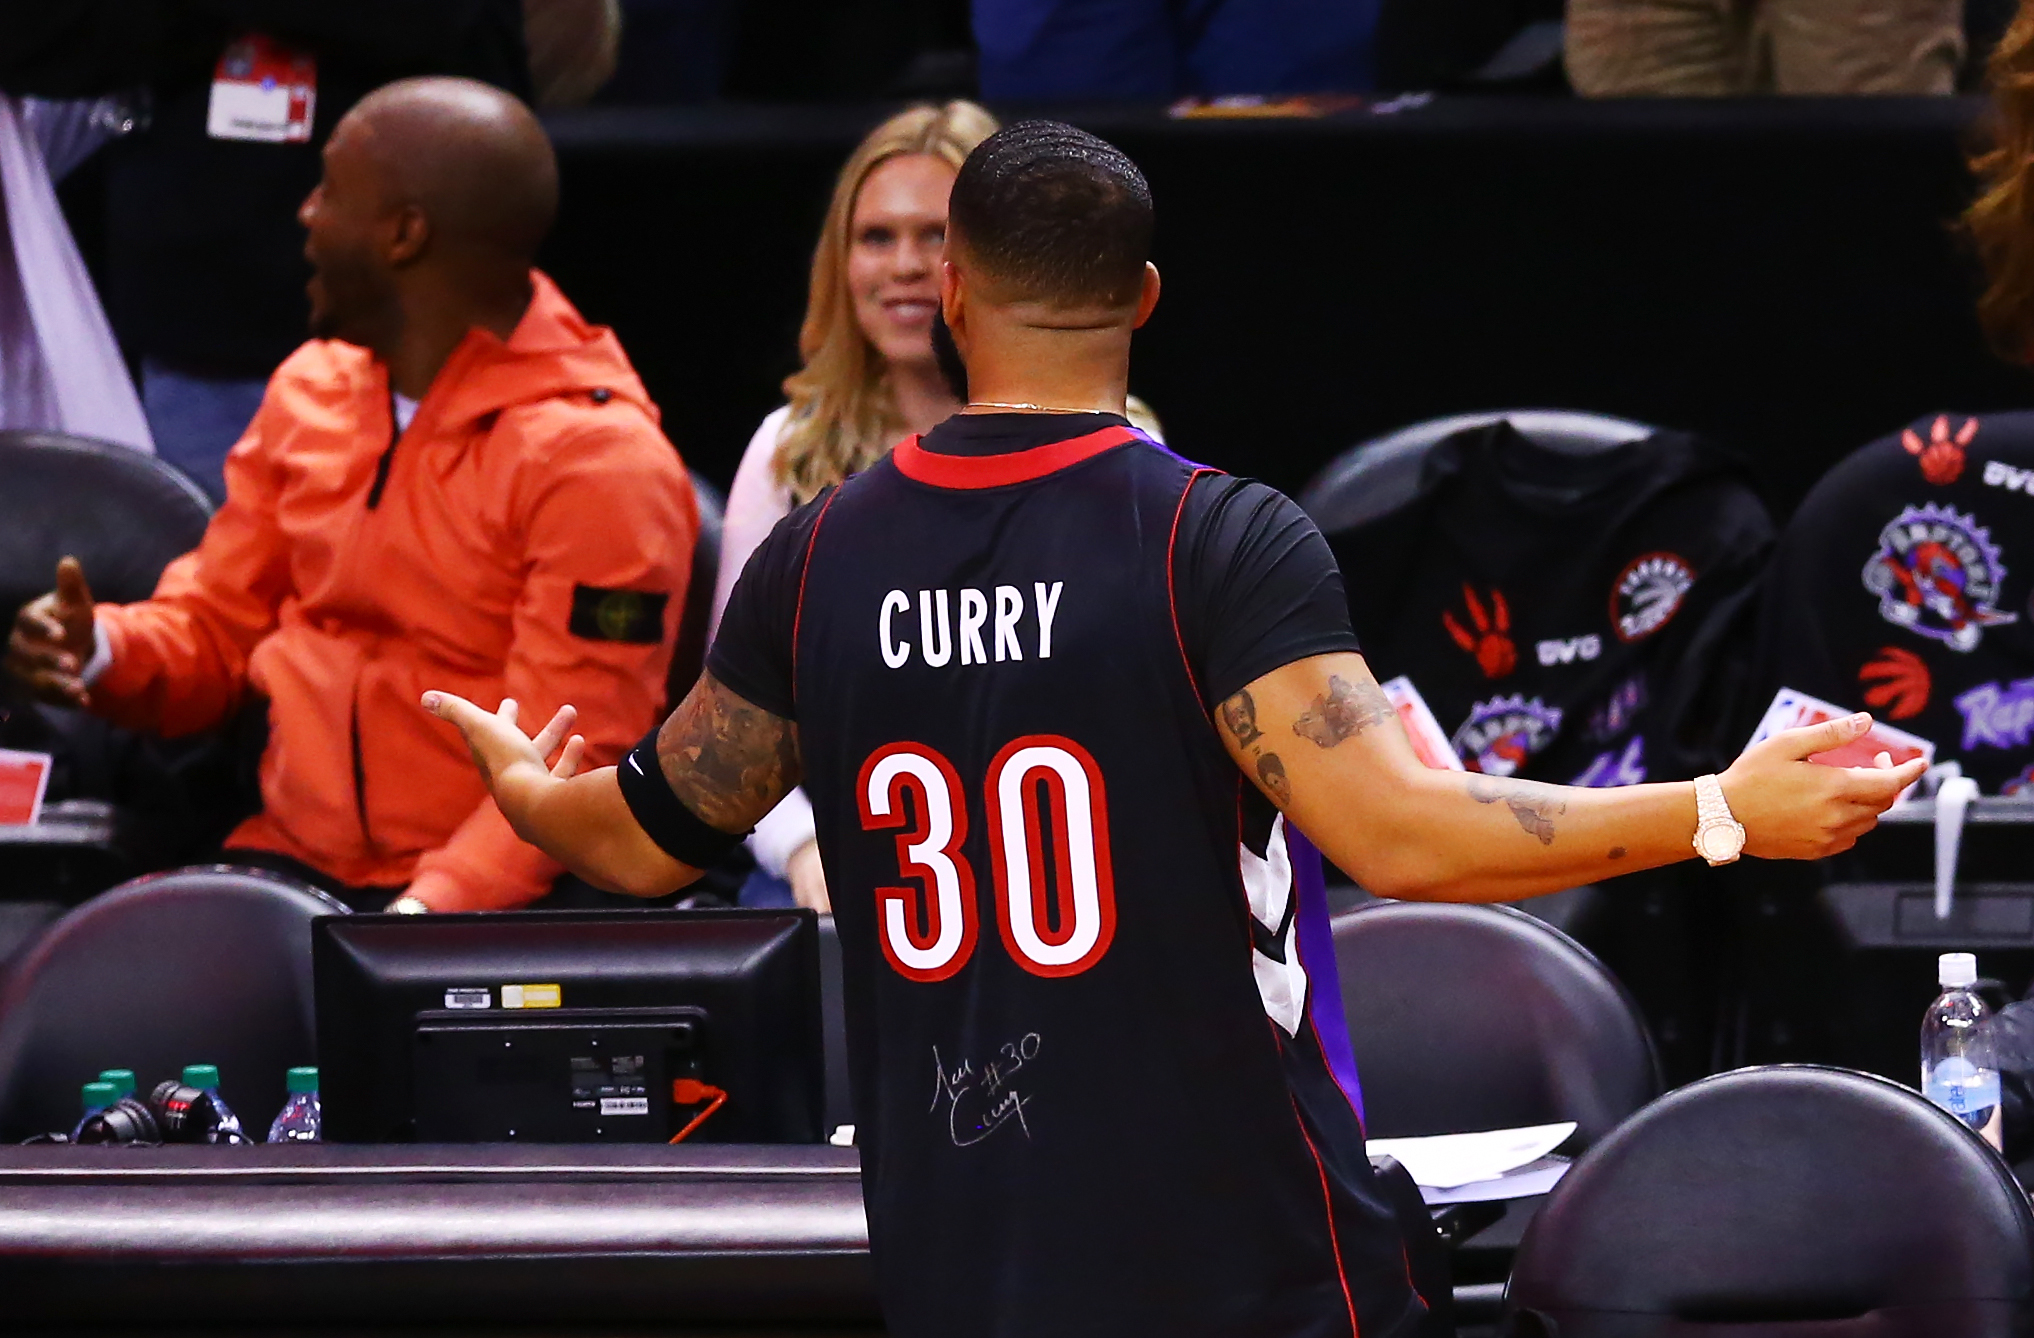 Q&A: The Dell Curry superfan that helped Drake troll Stephen Curry